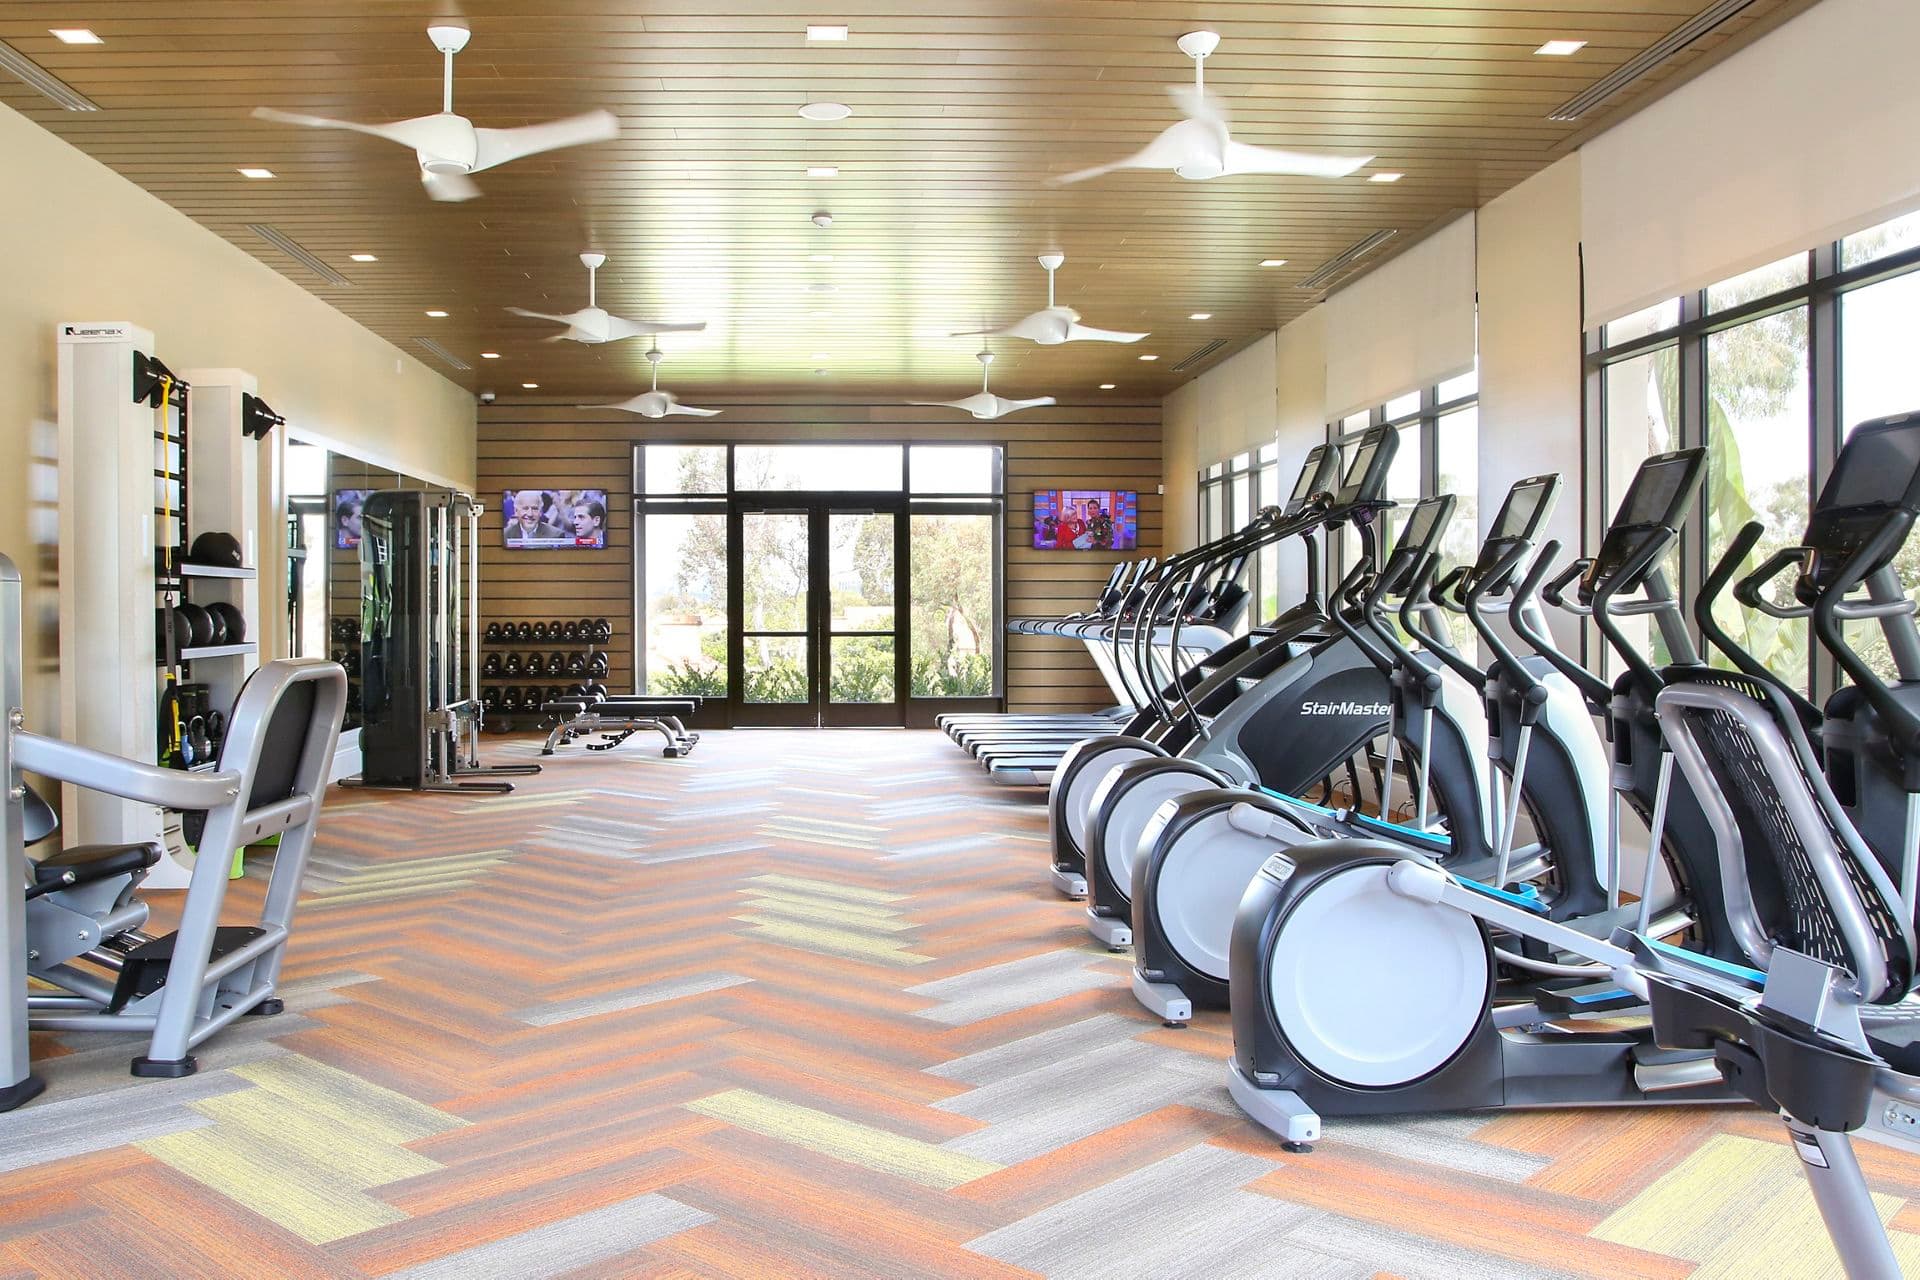 Interior view of fitness center at Newport North Apartment Homes in Newport Beach, CA.